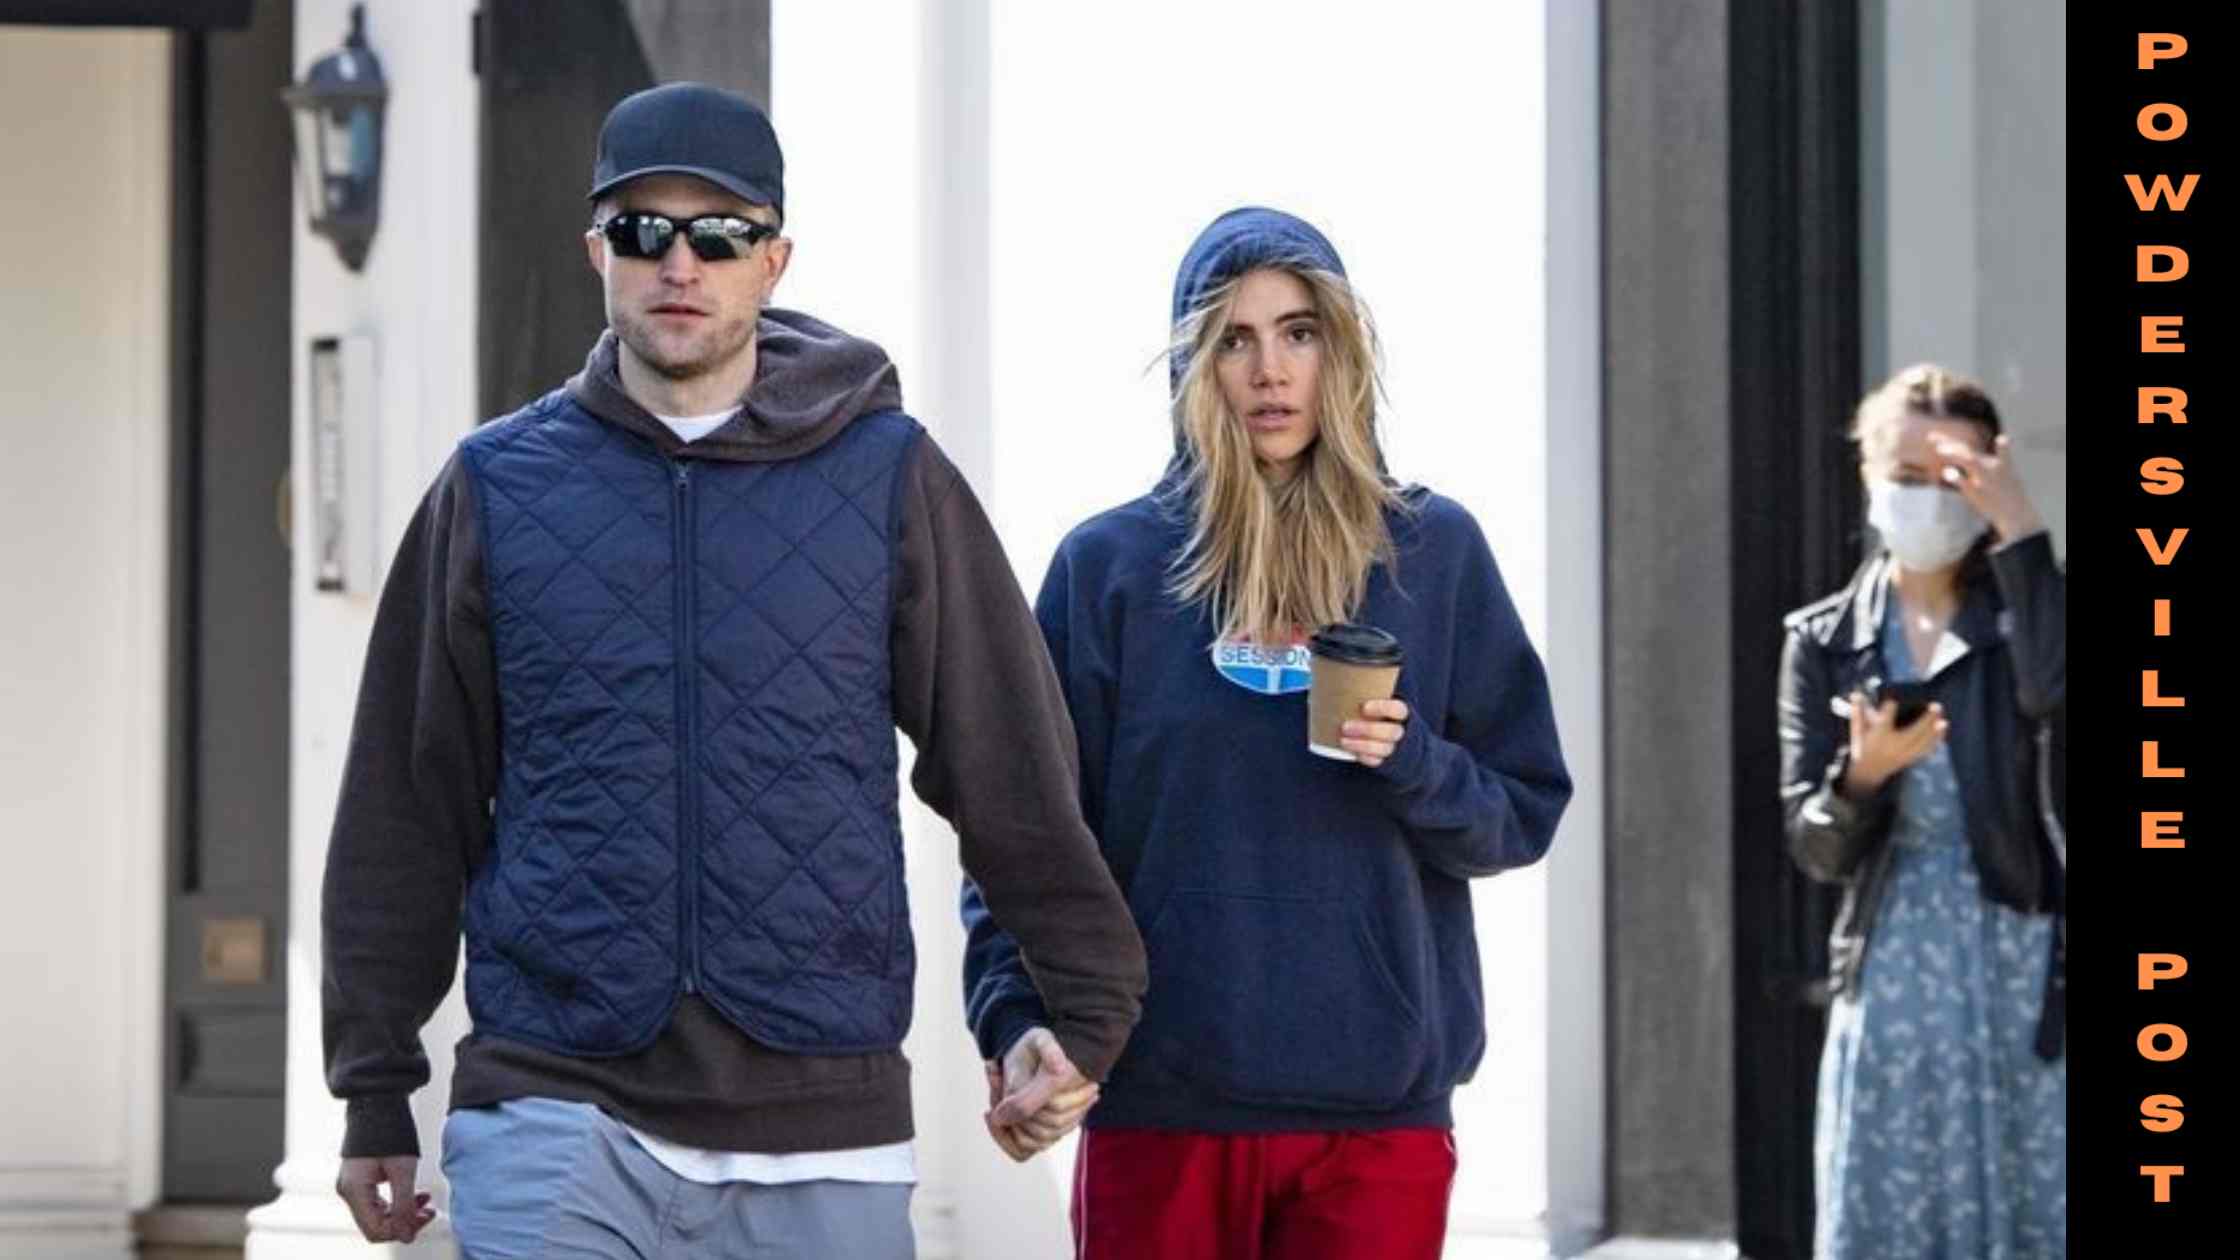 Is Robert Pattinson And Suki Waterhouse Are Being Together? Robert Pattinson's Dating History Revealed For The First Time